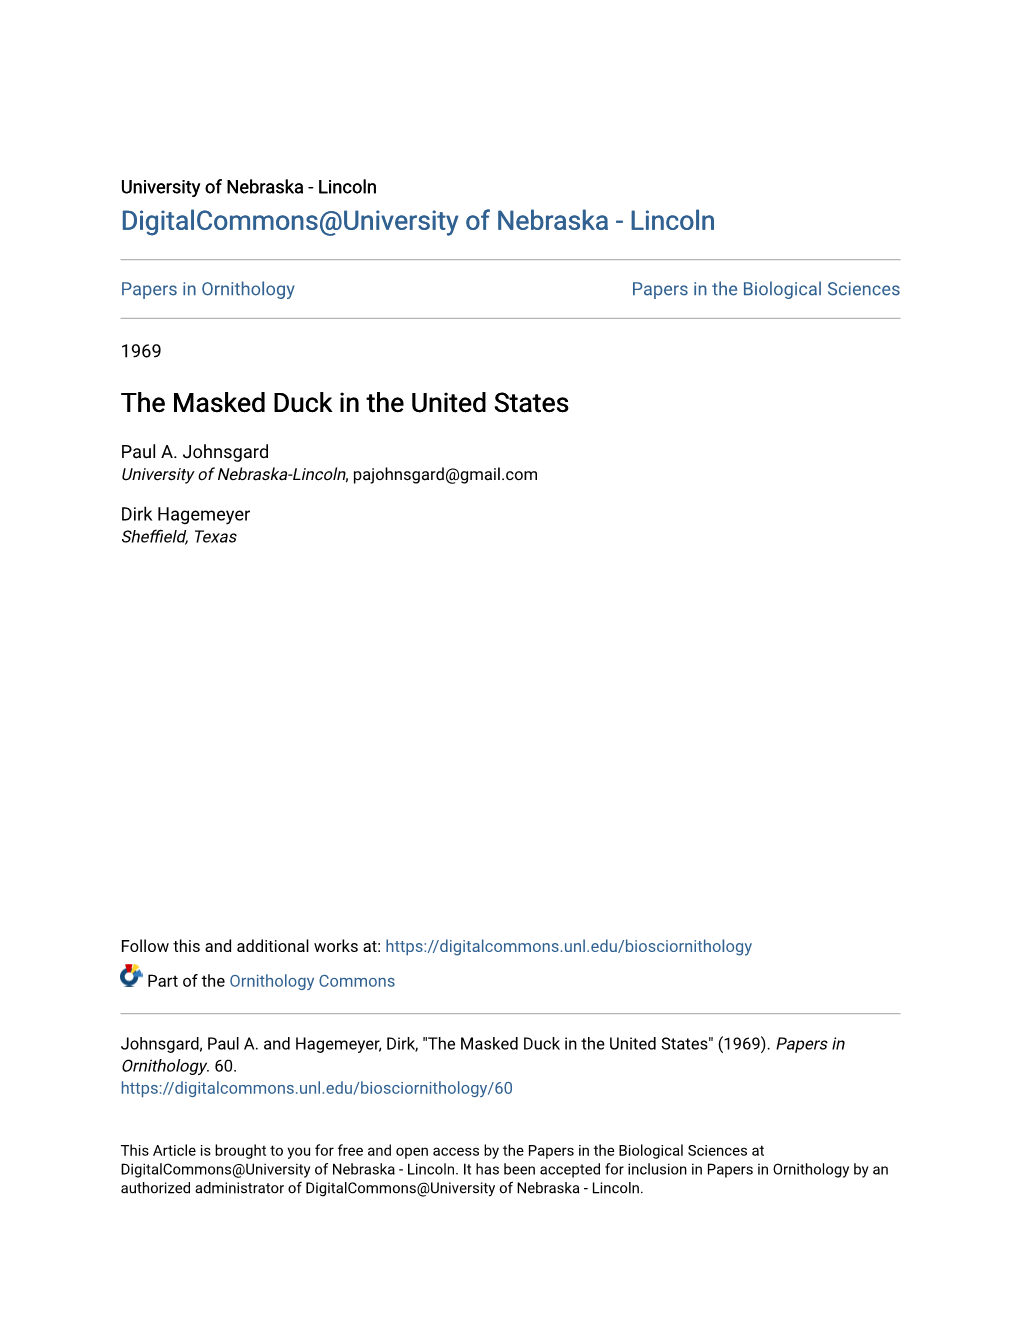 The Masked Duck in the United States